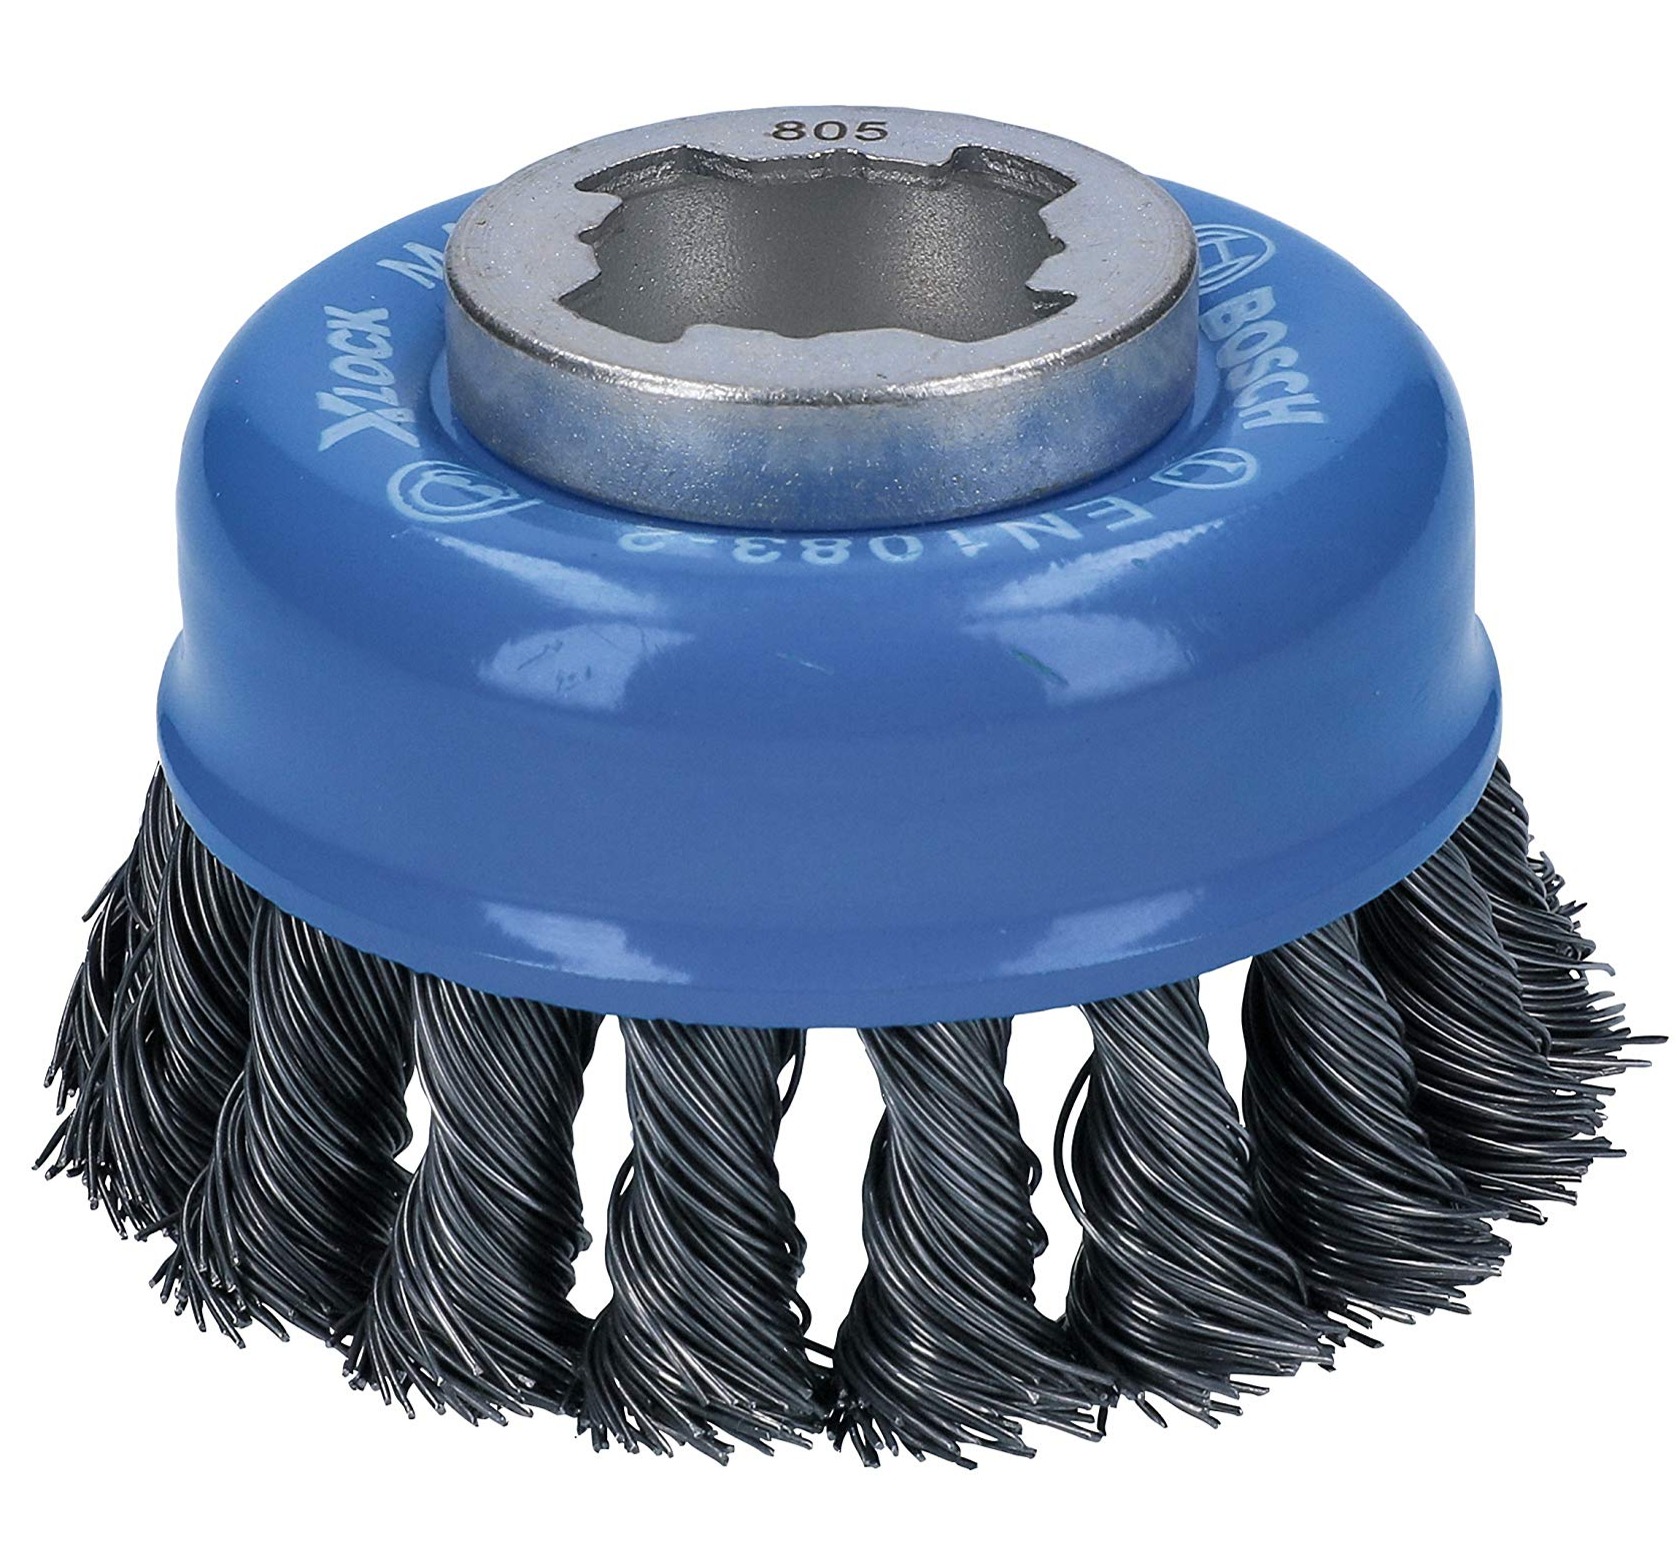 3"  Bosch WBX328  X-LOCK Arbor Carbon Steel Knotted Wire Single Row Cup Brush $12.29 + Free Shipping w/ Prime or on $35+